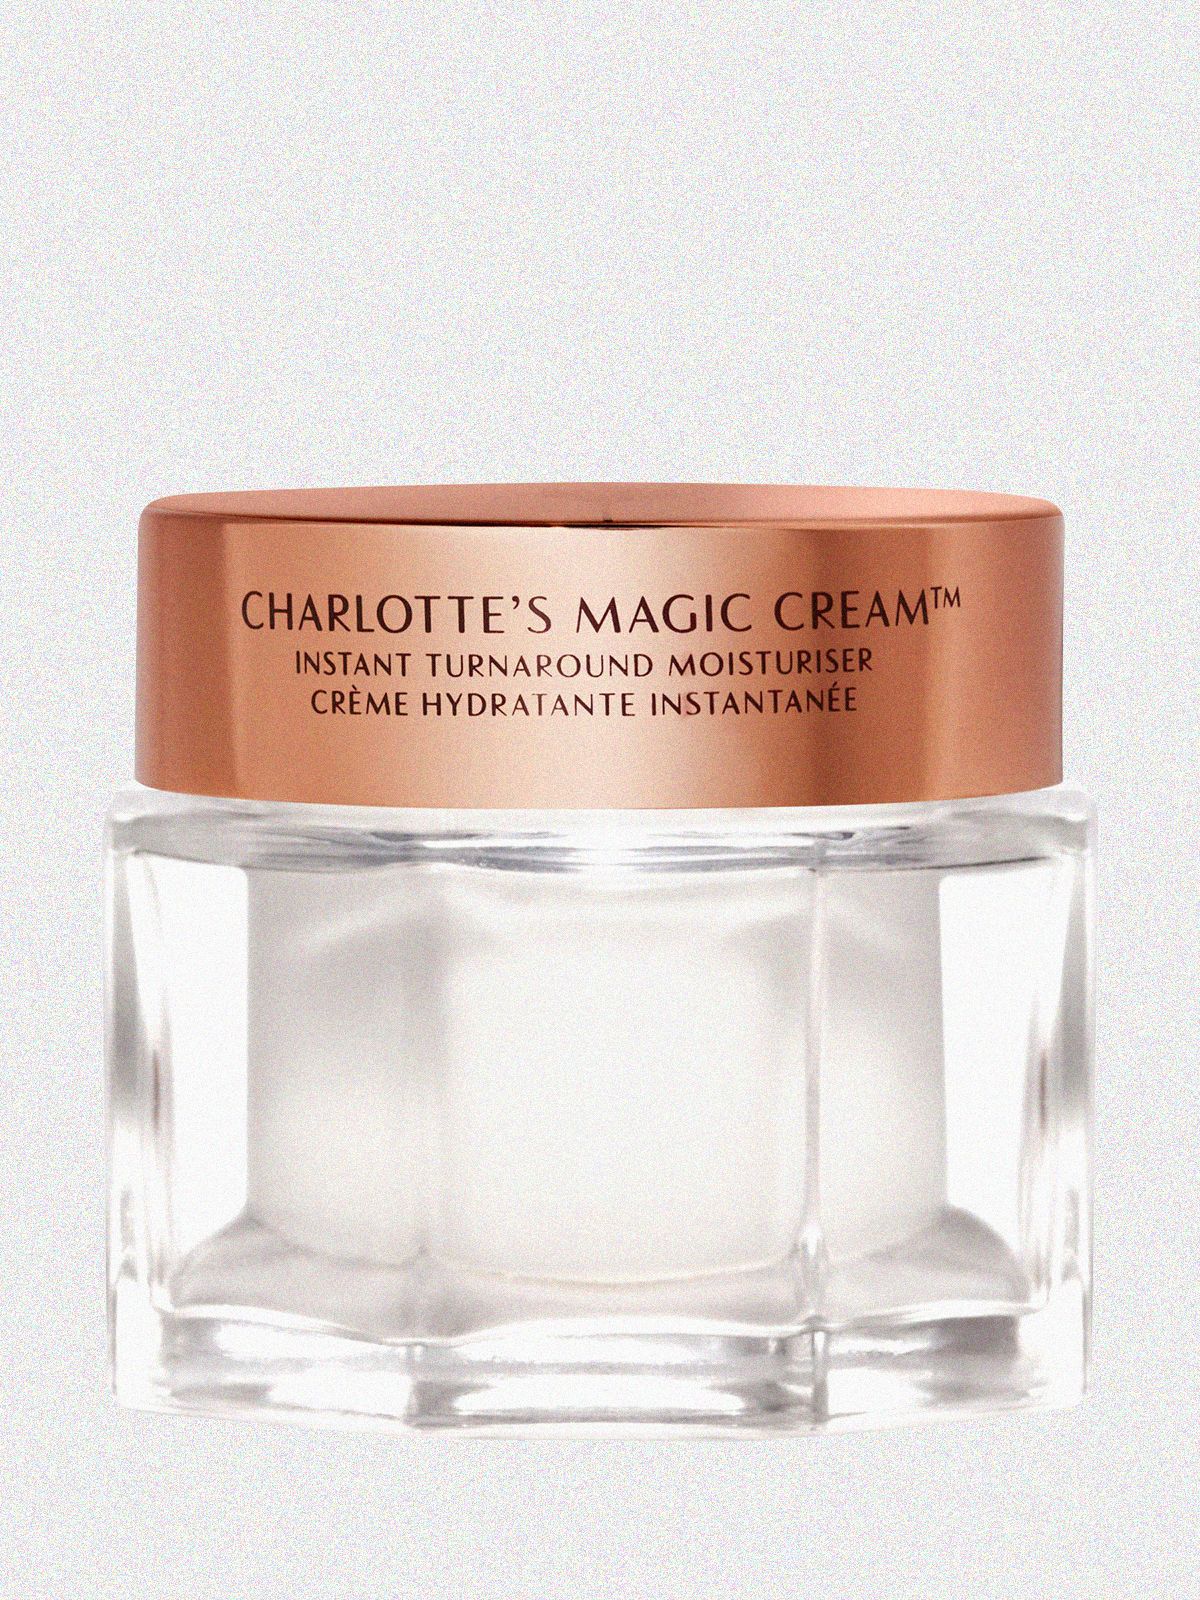 A limited-edition Charlotte Tilbury Platinum Jubilee collection